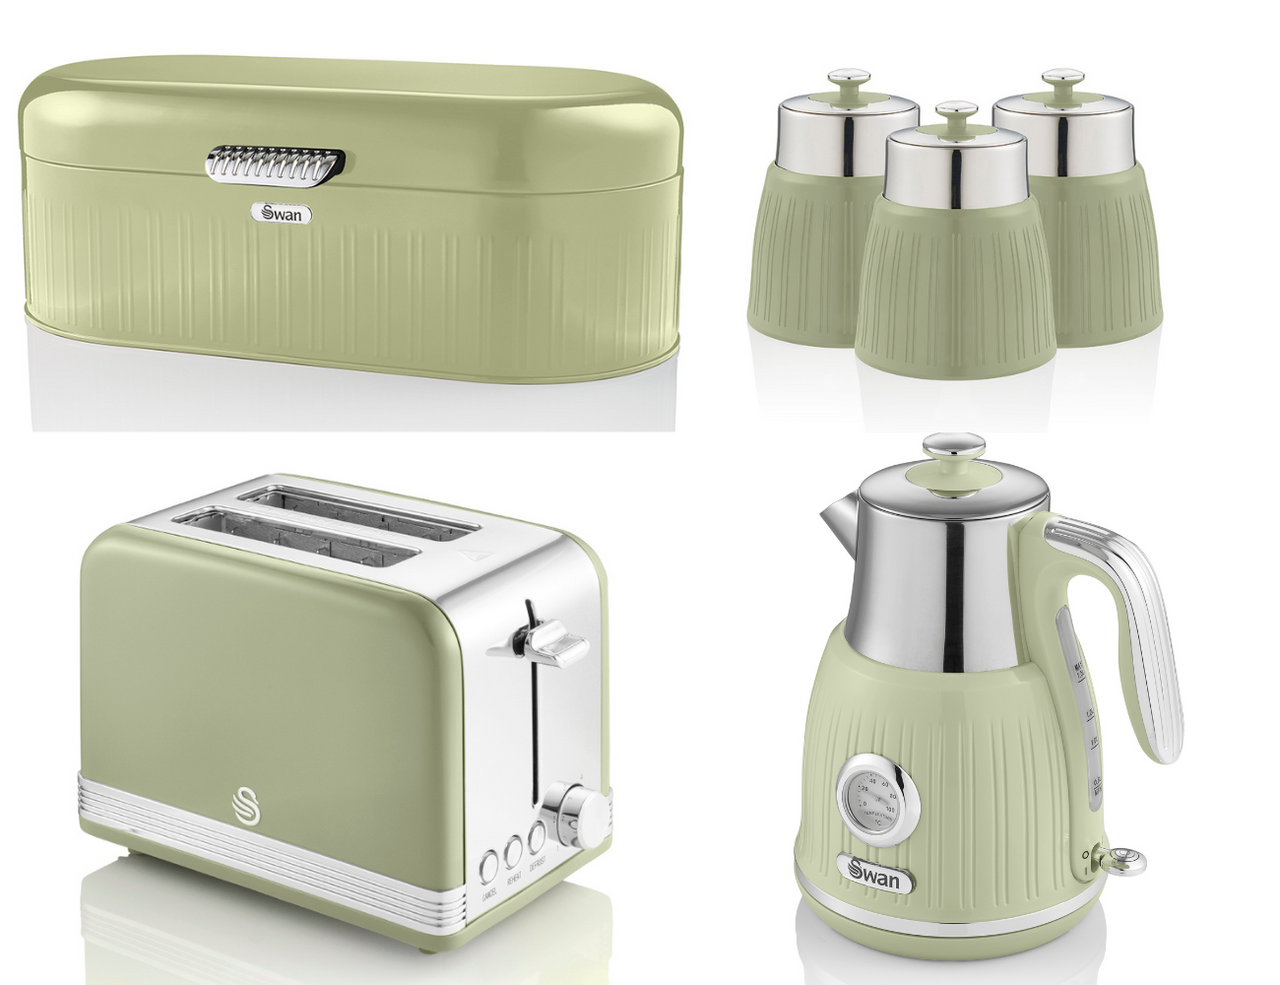 SWAN Retro Green Dial Kettle 2 Slice Toaster Breadbin Canisters Kitchen Set of 6